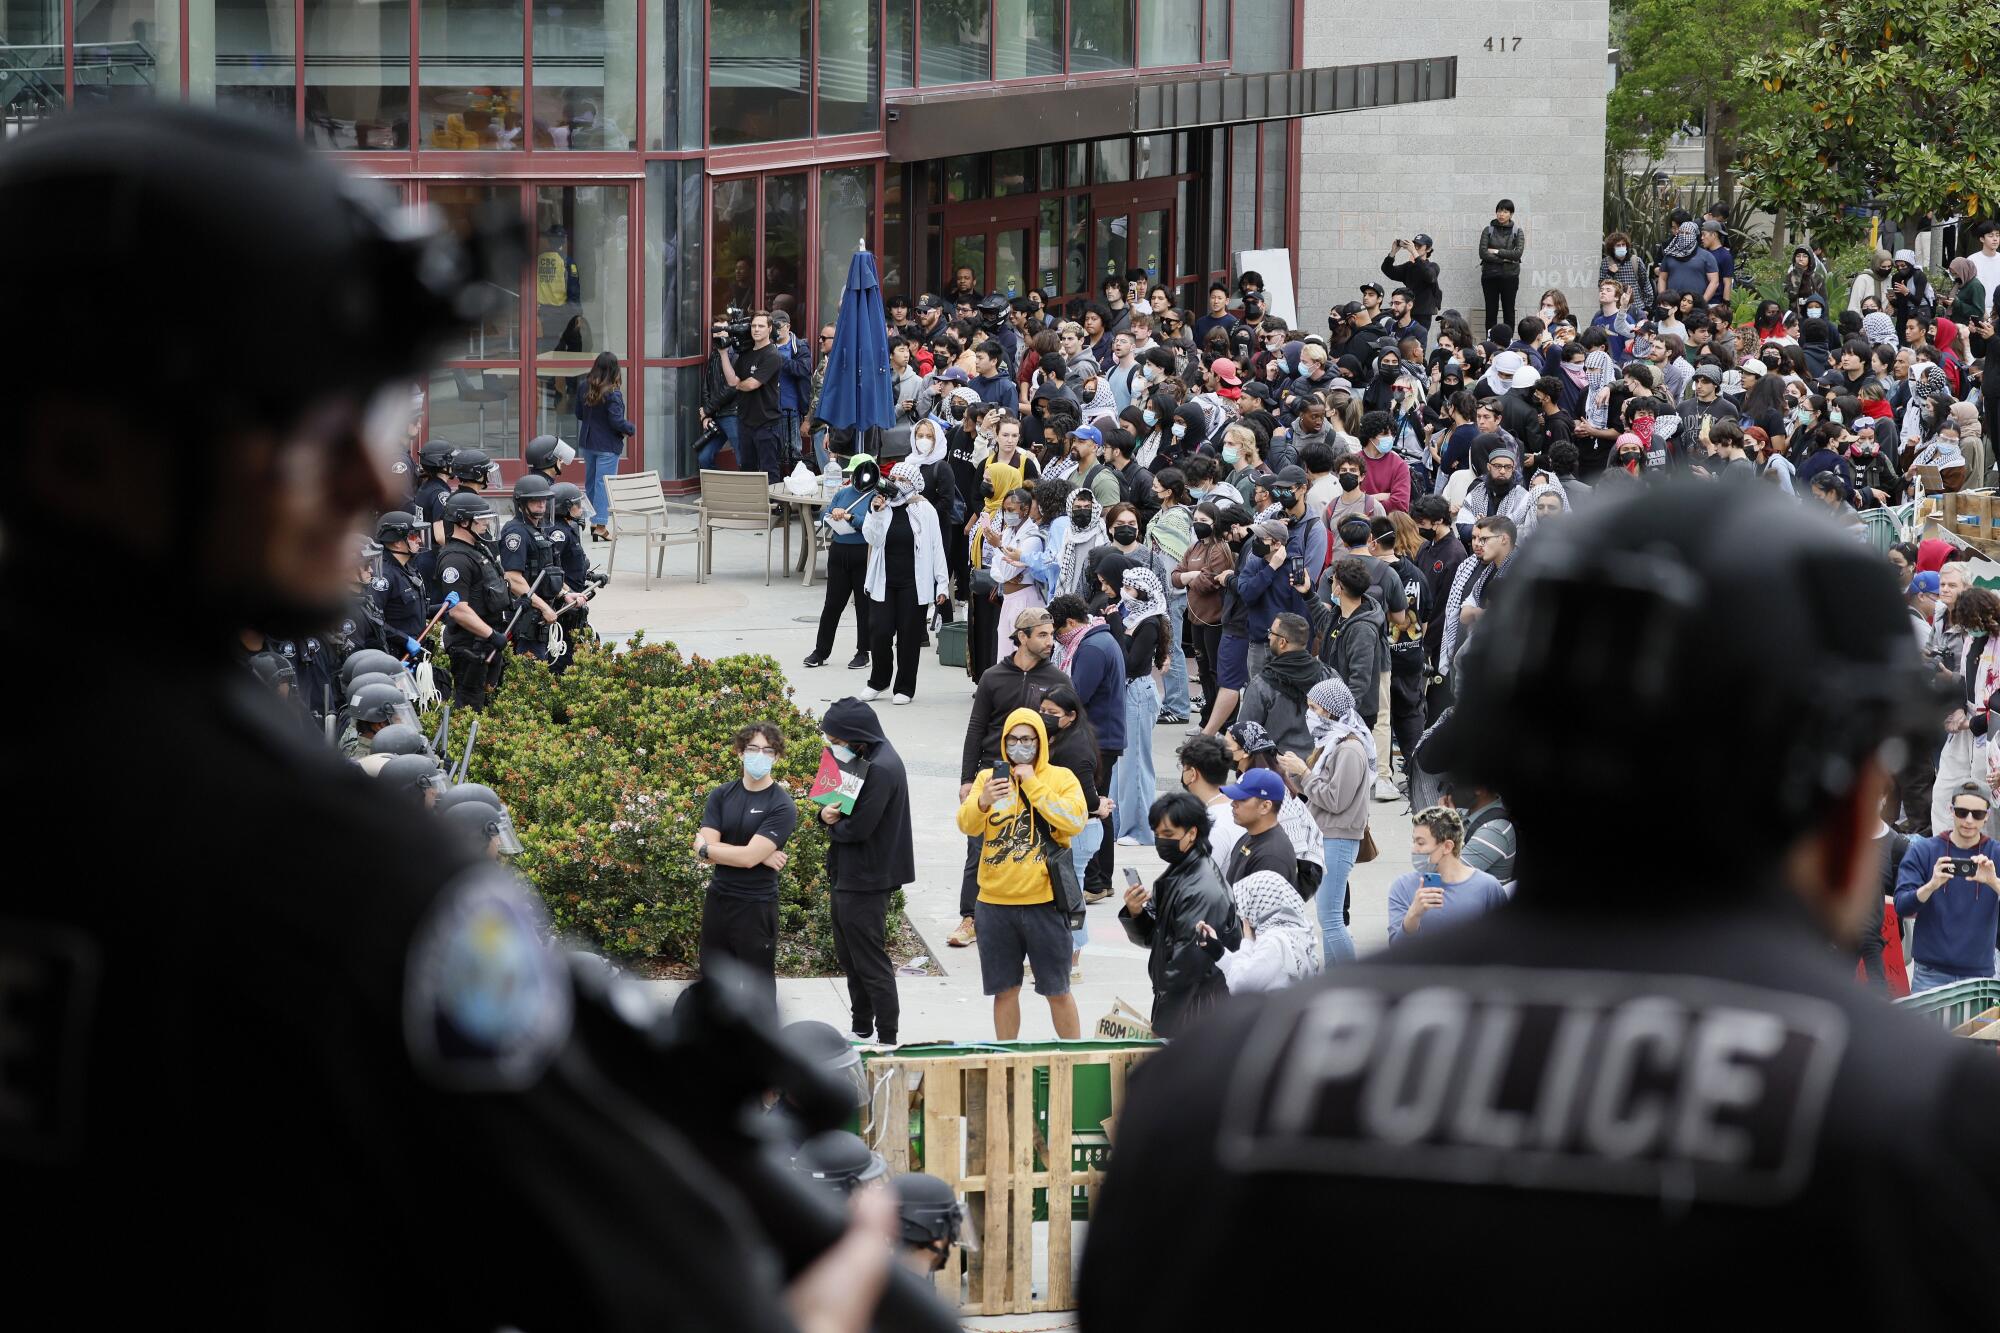 Law enforcement from multiple agencies monitor protesters at ICU on May 15, 202